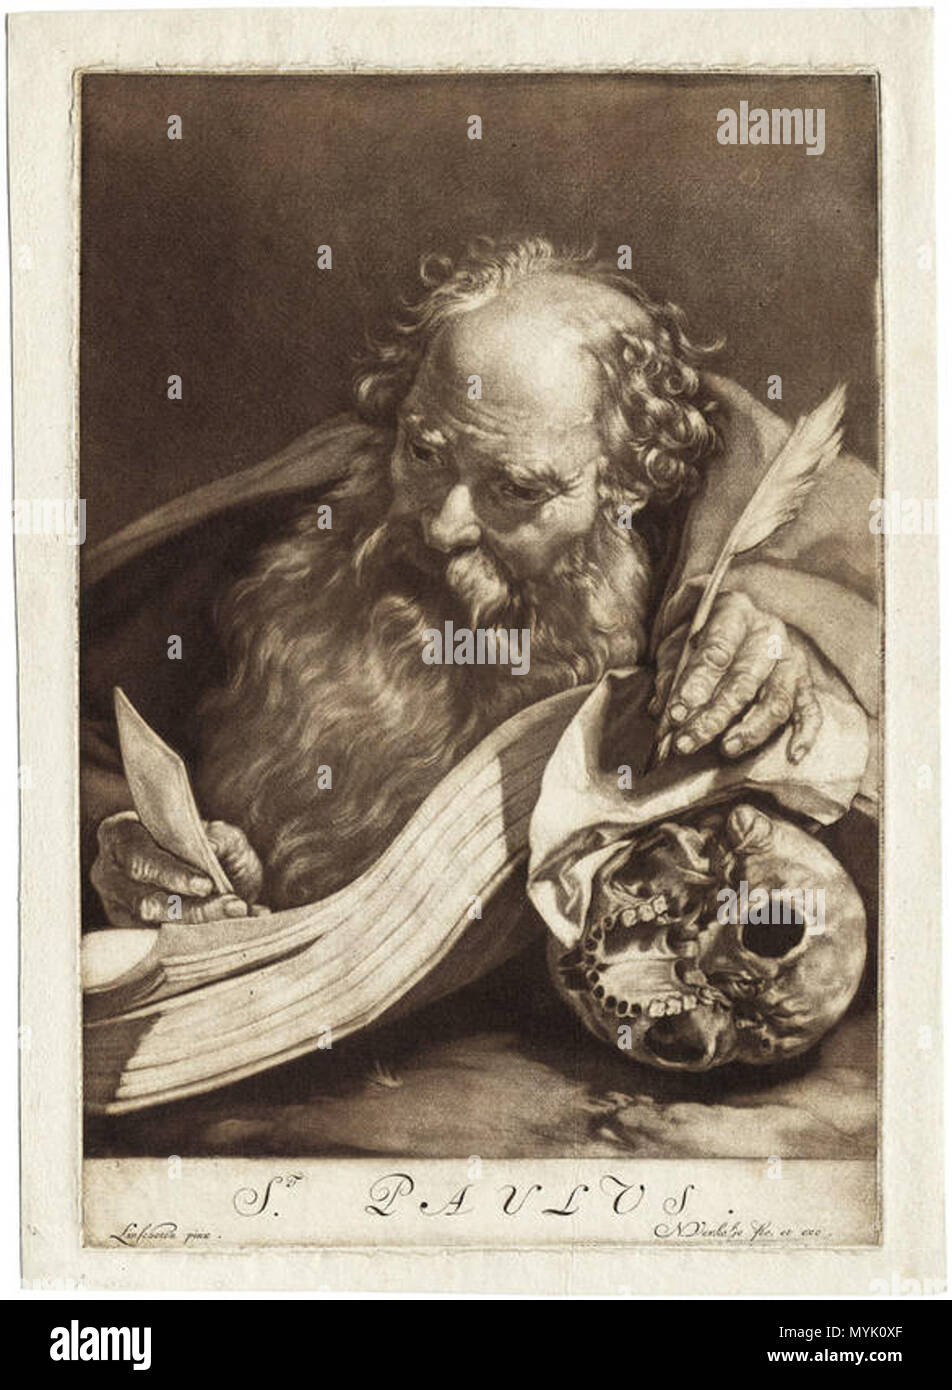 . English: The apostle paul reading by candlelight, with a large open book leaning on a skull, seen from below. Mezzotint . Linschoten pinx; Nicolaas Verkolje fec et exc 325 Linschoten pinx - N Verkolje fec et exc - apostle Paul Stock Photo